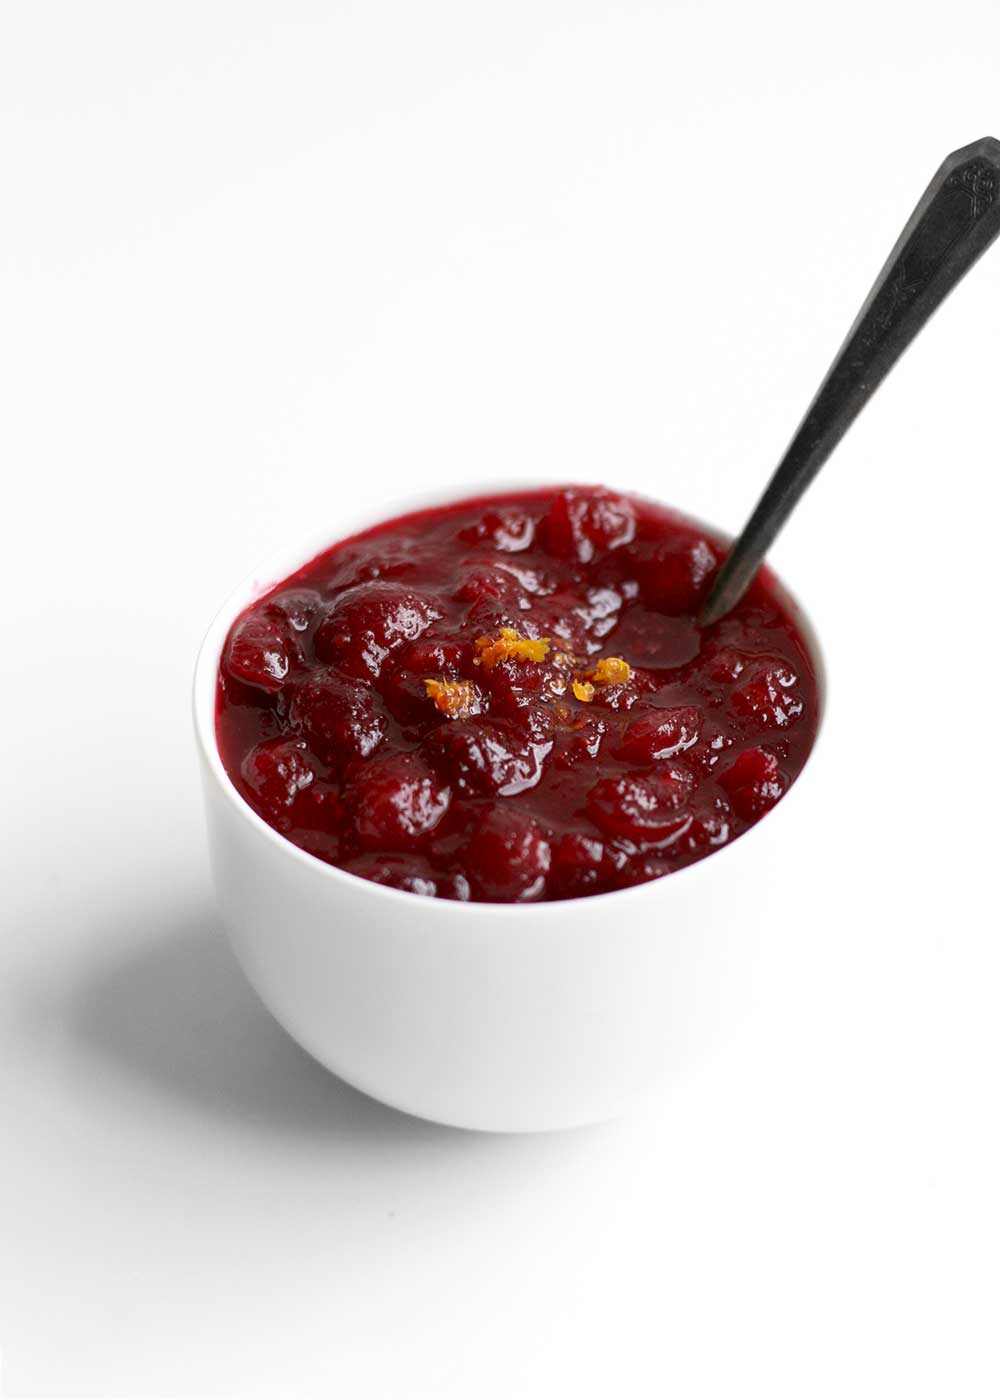 Homemade cranberry sauce from the faux martha